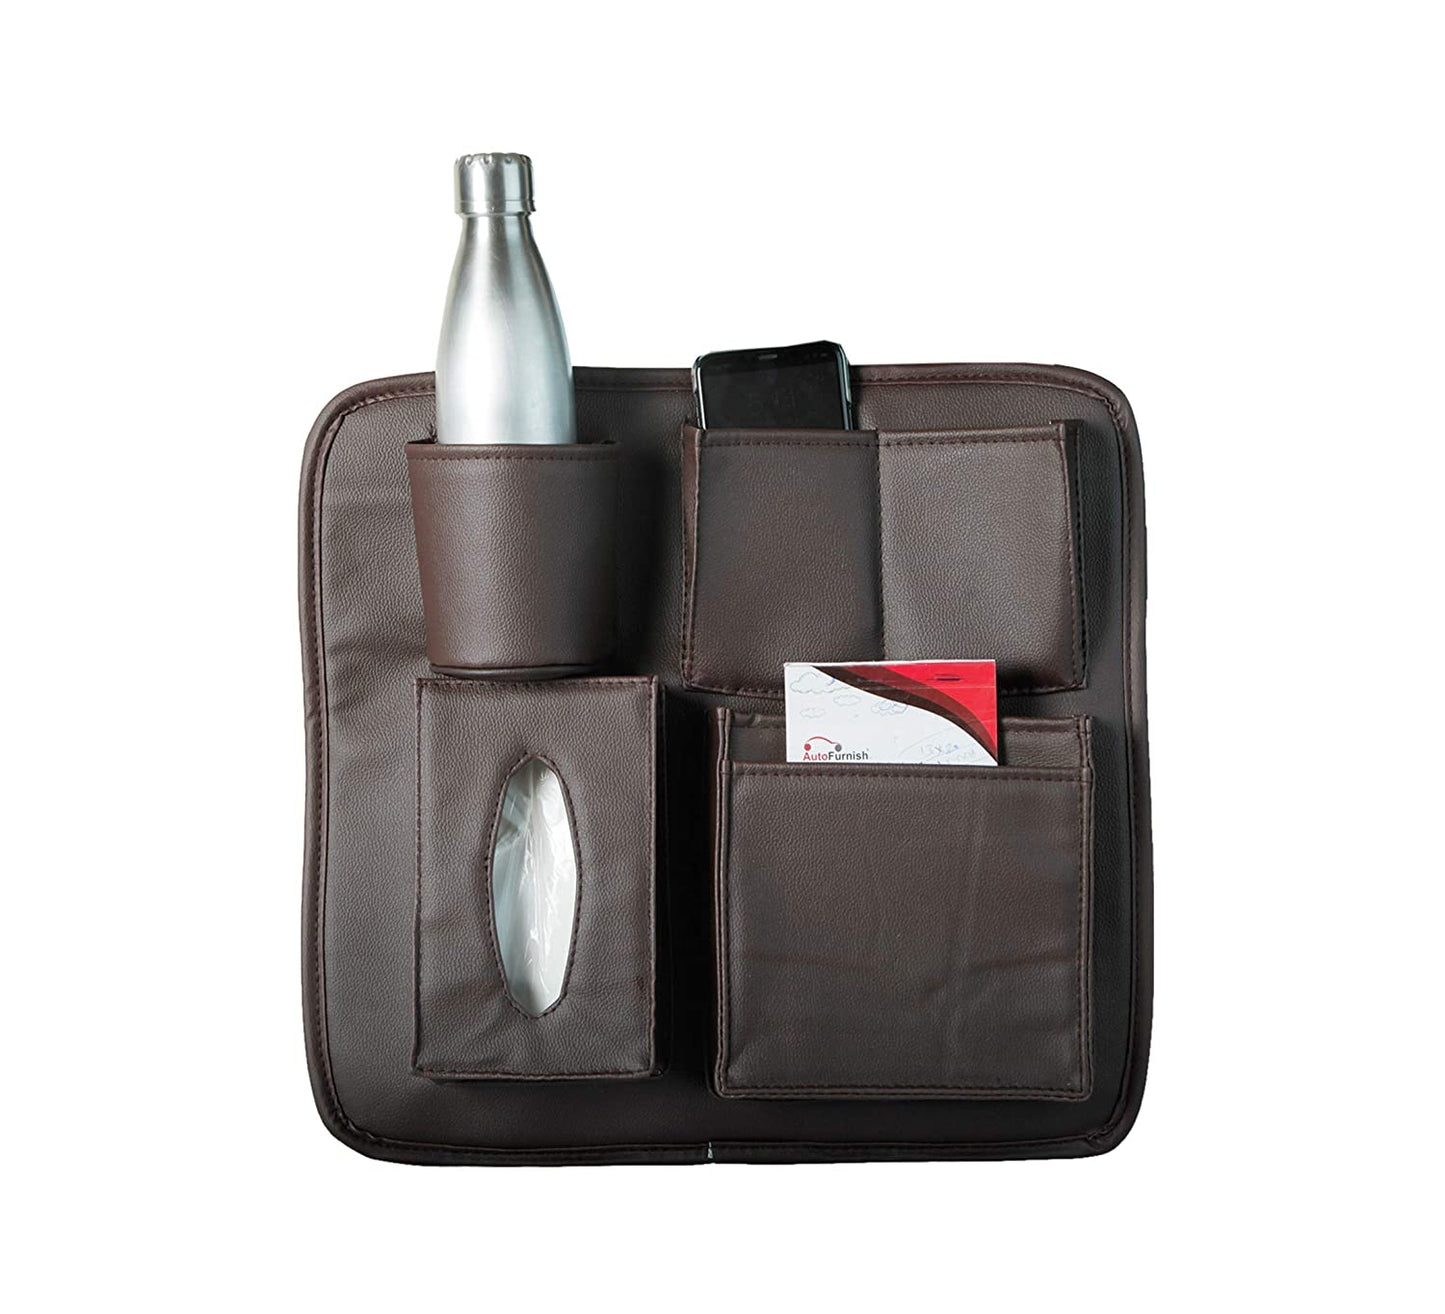 COMPACT Car Seat Organizer | PU Leather with 6 Pockets - Tissues, Bottles, Phone, iPad Mini, Documents (Set of 2)